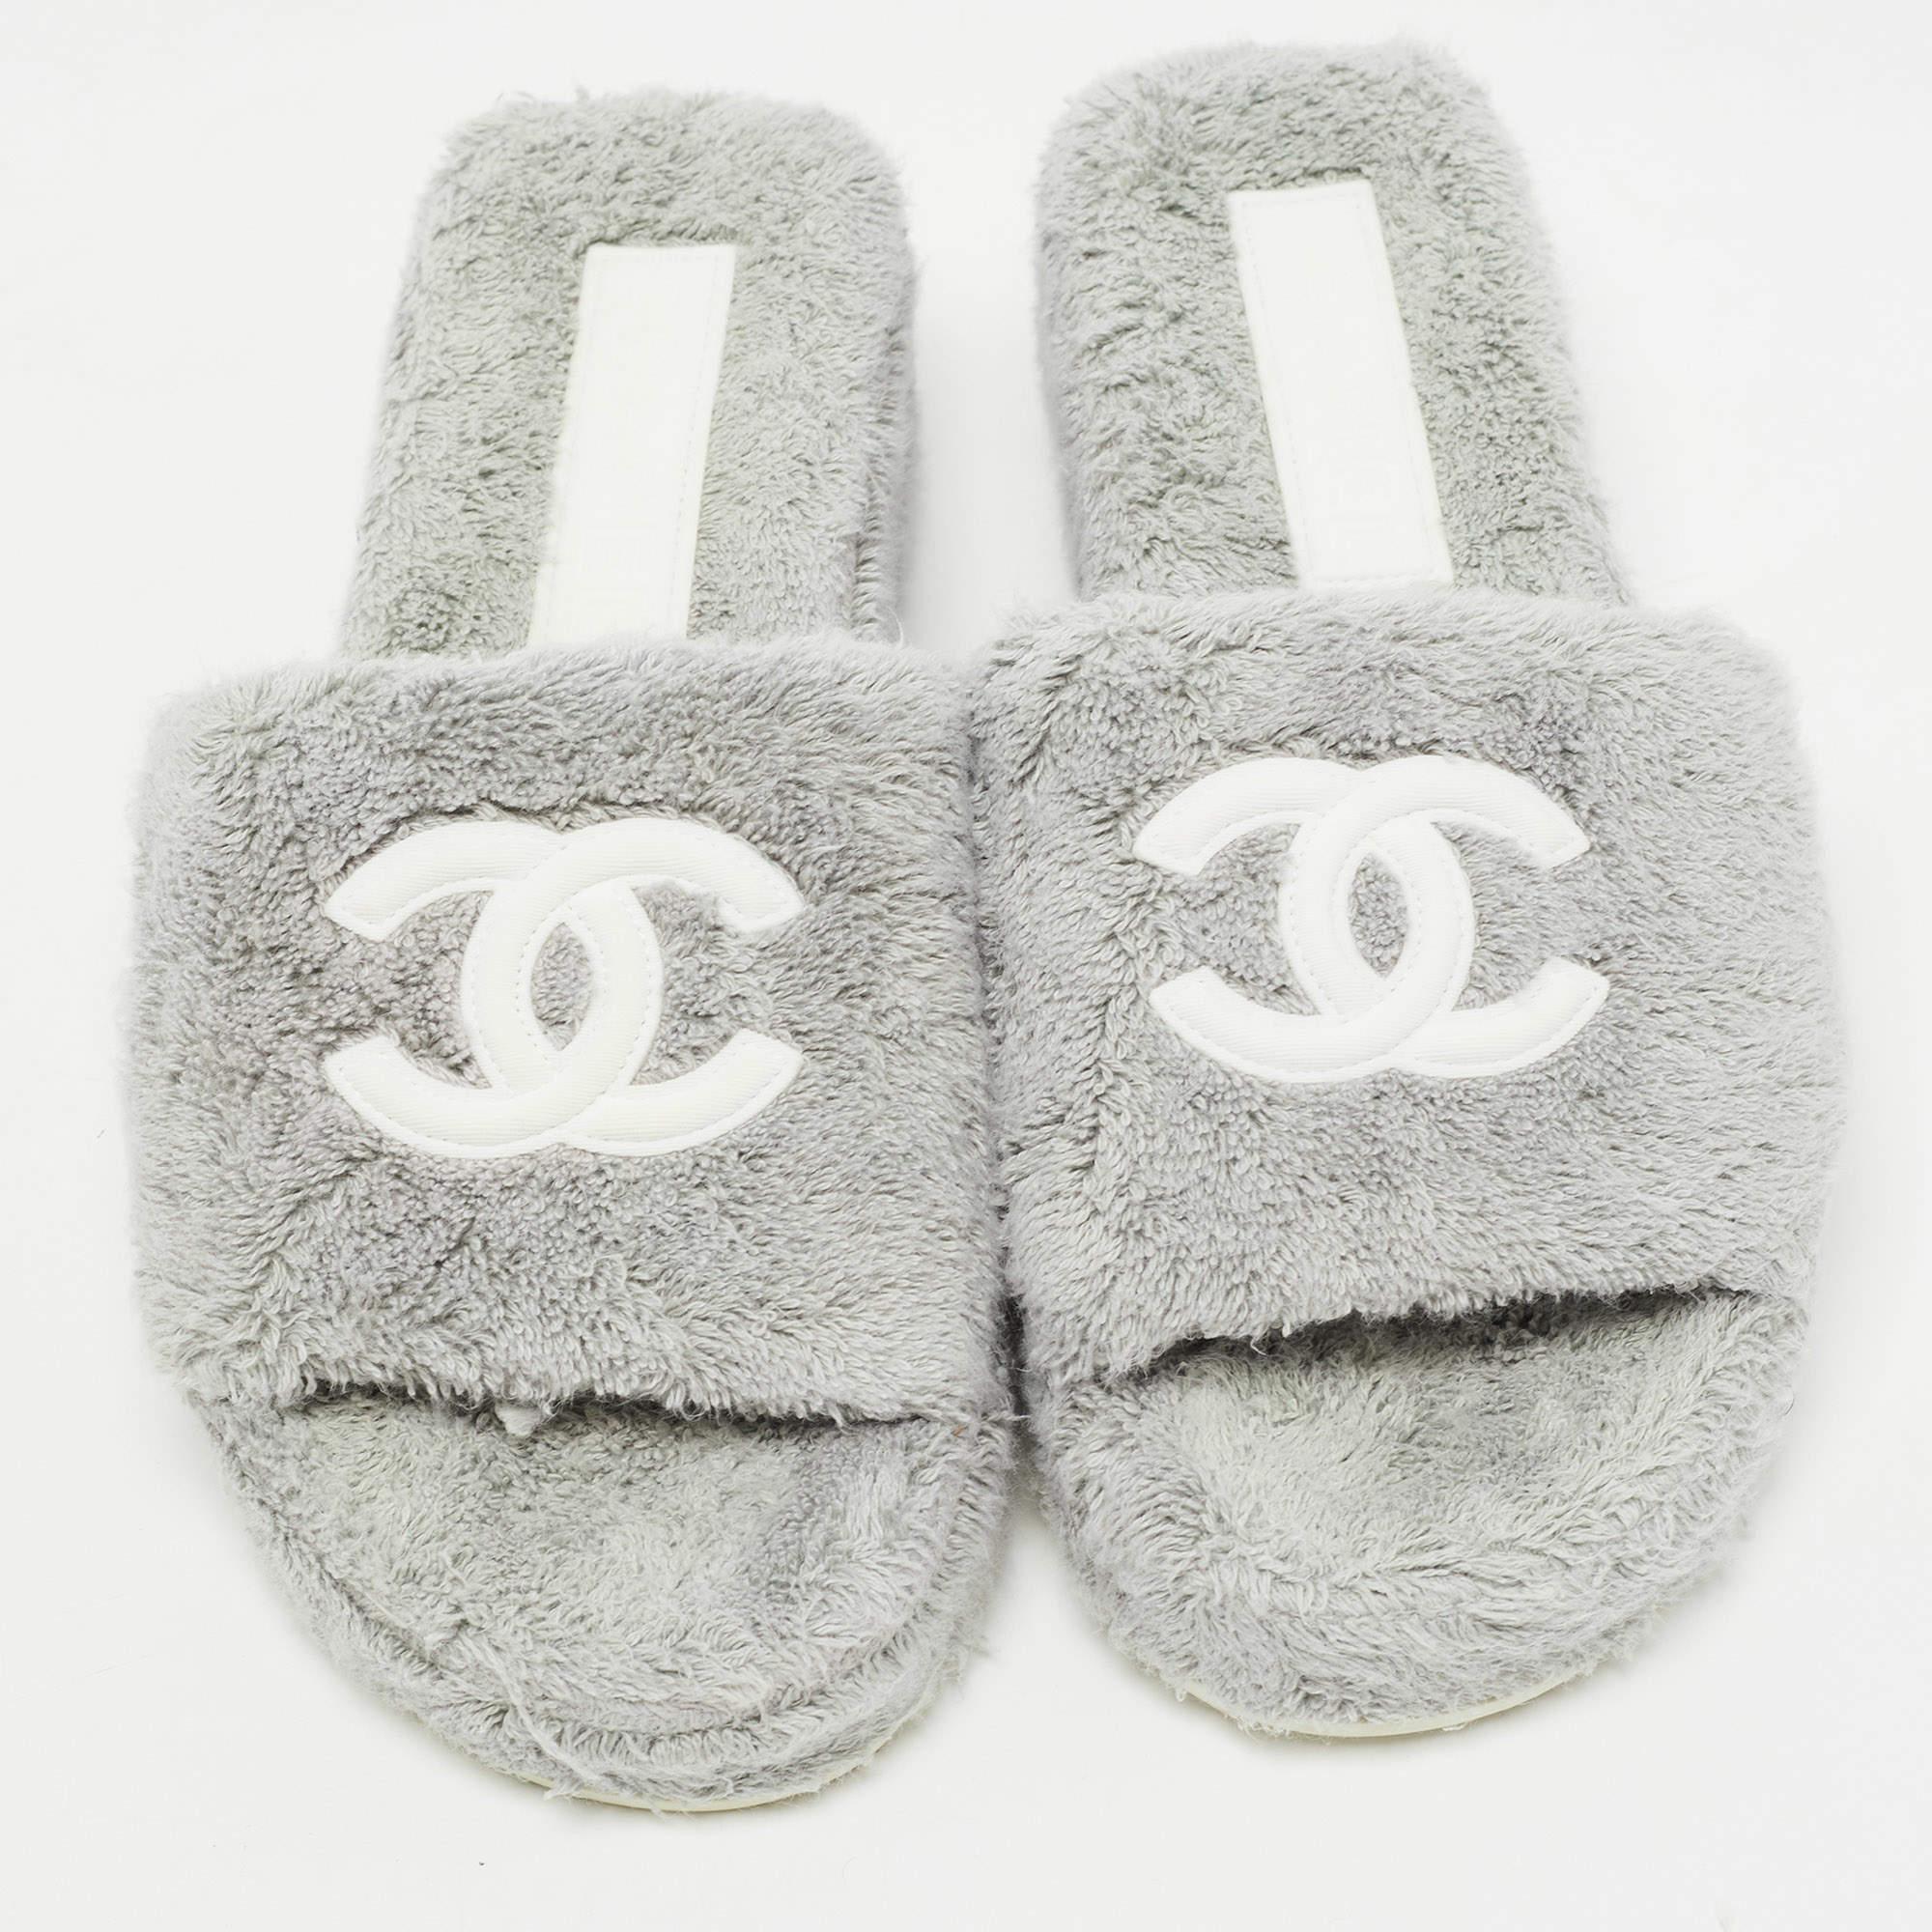 Chanel's platform slides are made of fabric and have a fuzzy design. They are highlighted by the CC logo on the uppers and finished with rubber soles.

